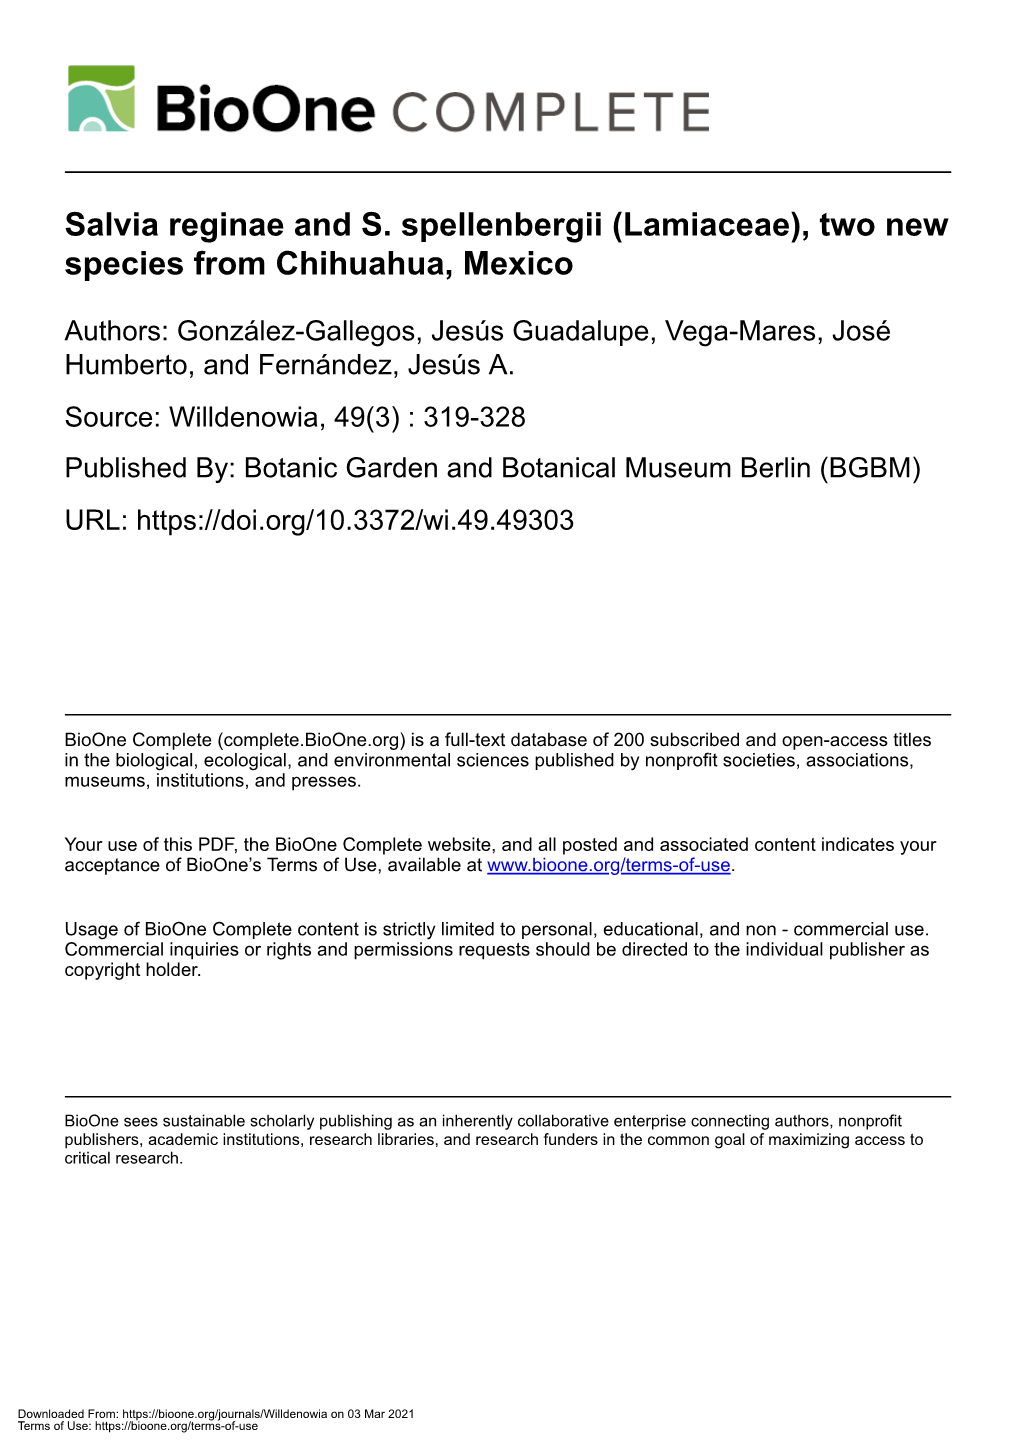 Salvia Reginae and S. Spellenbergii (Lamiaceae), Two New Species from Chihuahua, Mexico